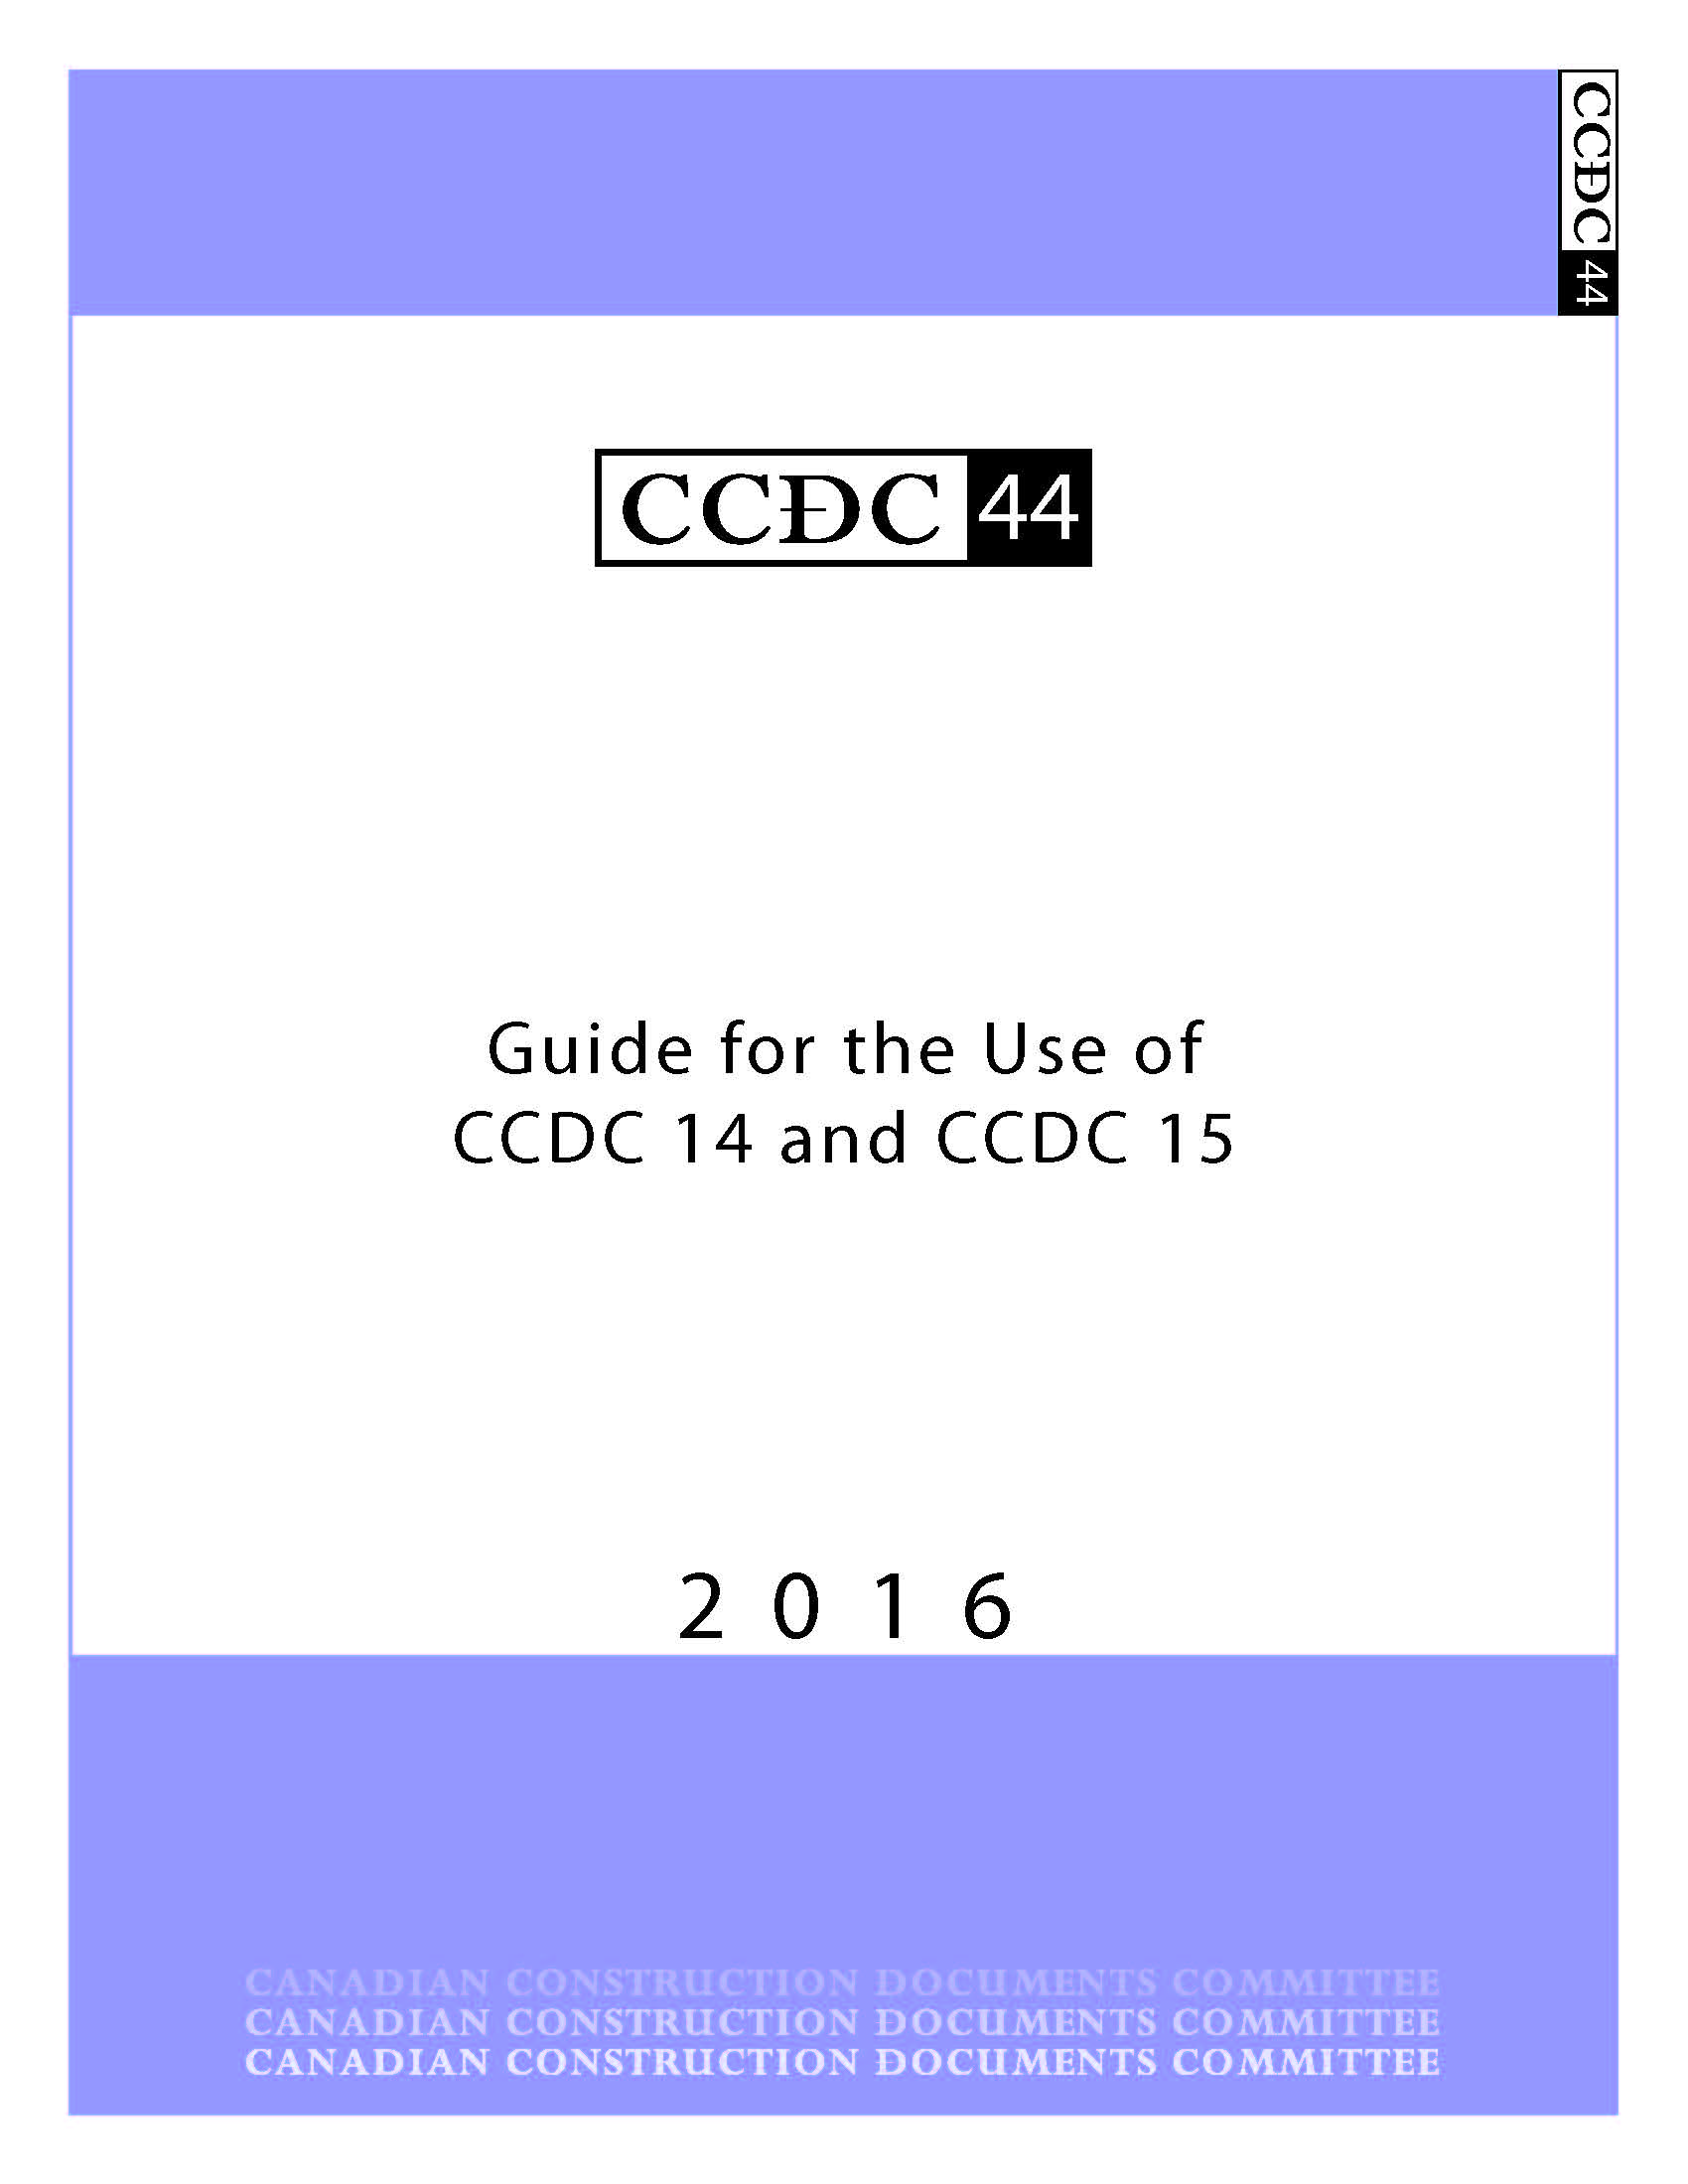 CCDC 44 [Electronic Version]  Guide to use of CCDC 14 & CCDC 15